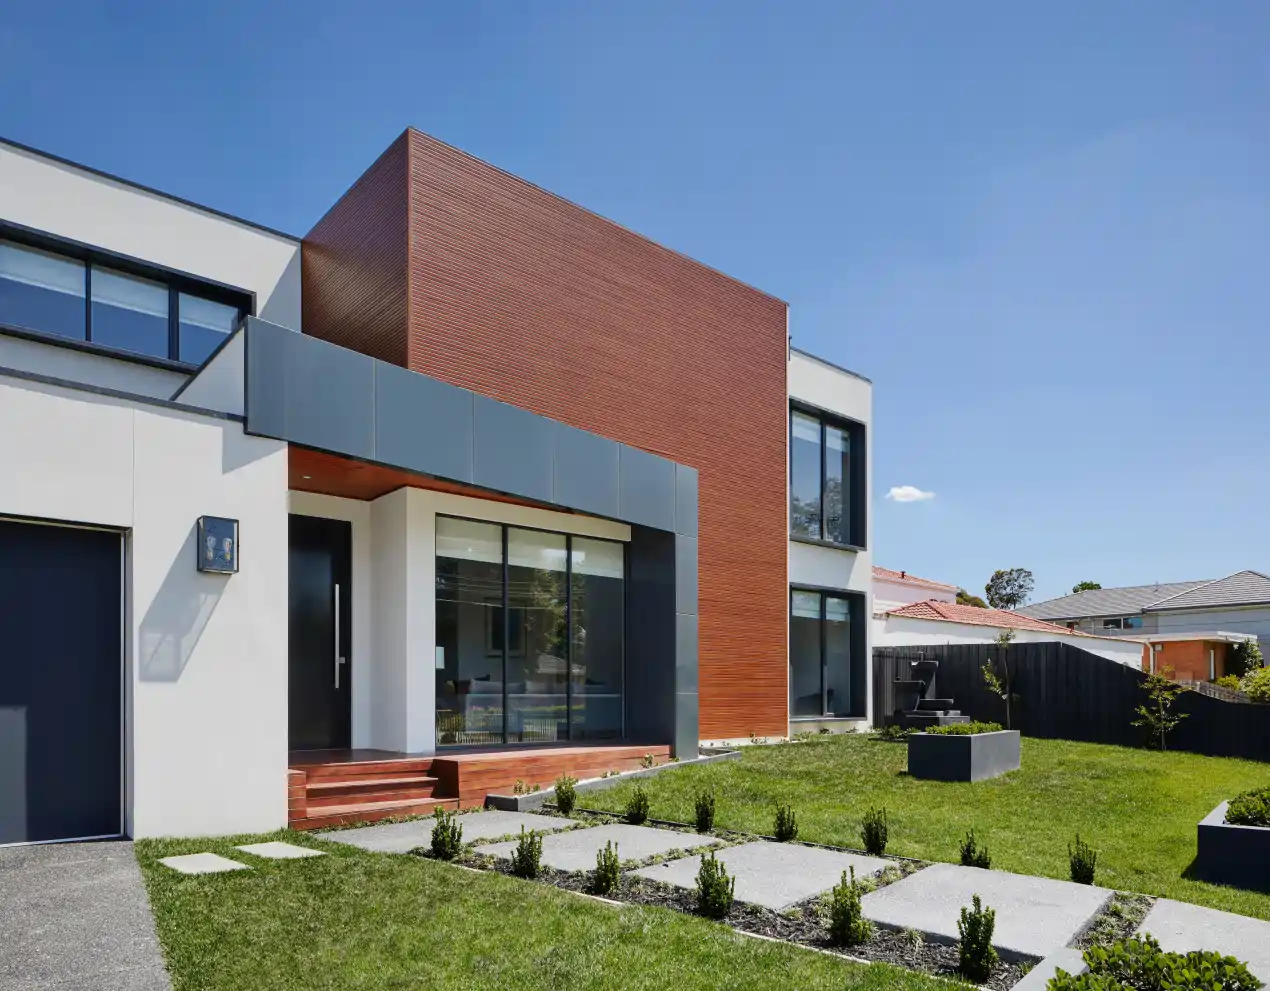 a modern house made with bricks, concrete and steal plates